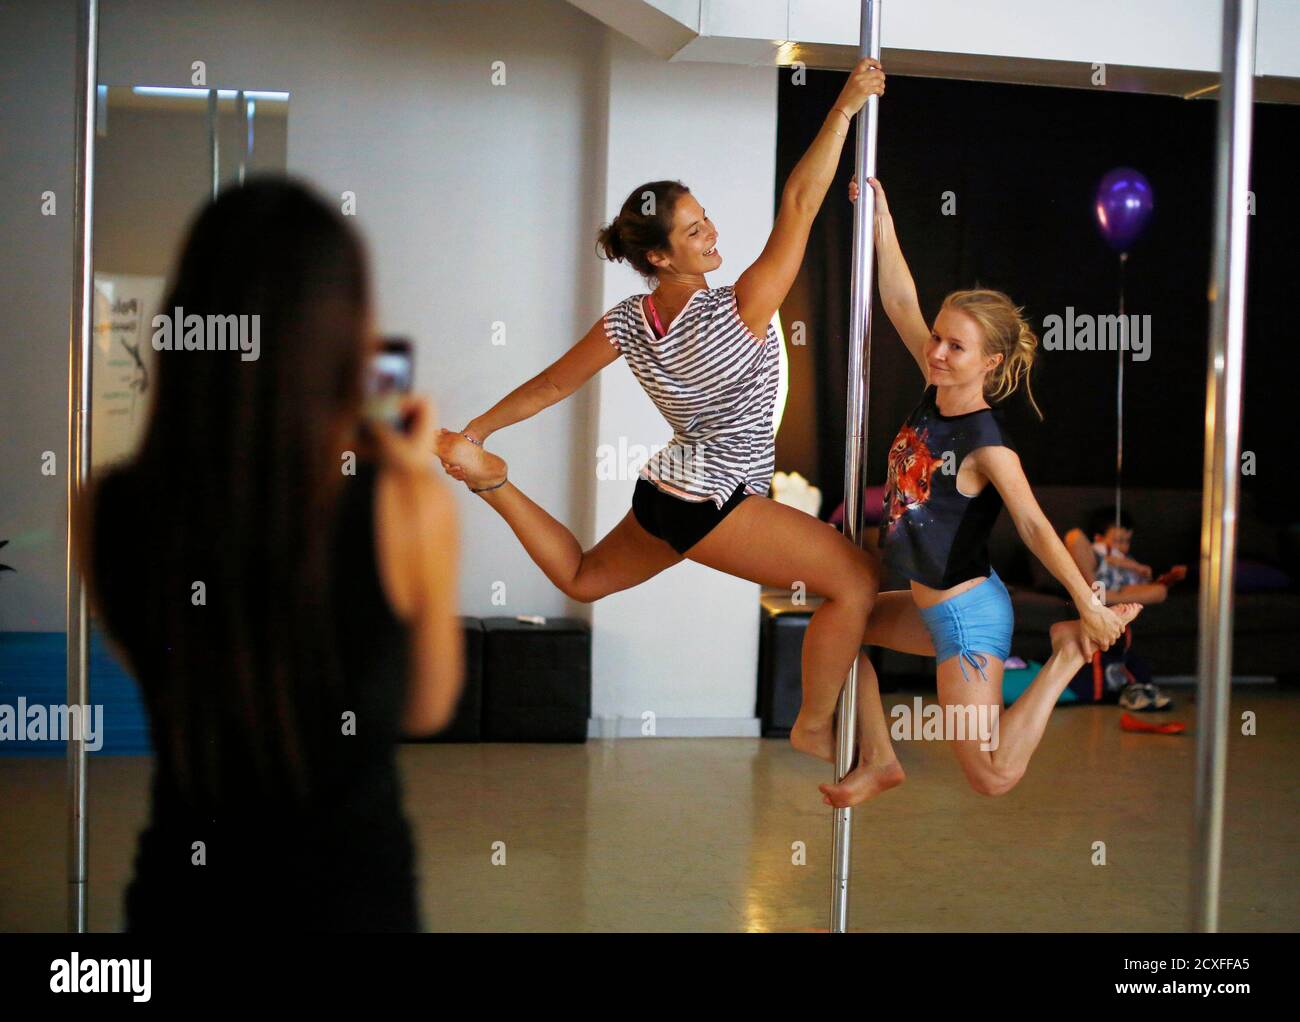 Women practise a pole dancing move during an International Women's Day  event at a women's-only pole dancing fitness studio called Studio  Exclusive, in Sydney March 8, 2014. The event raised money for "